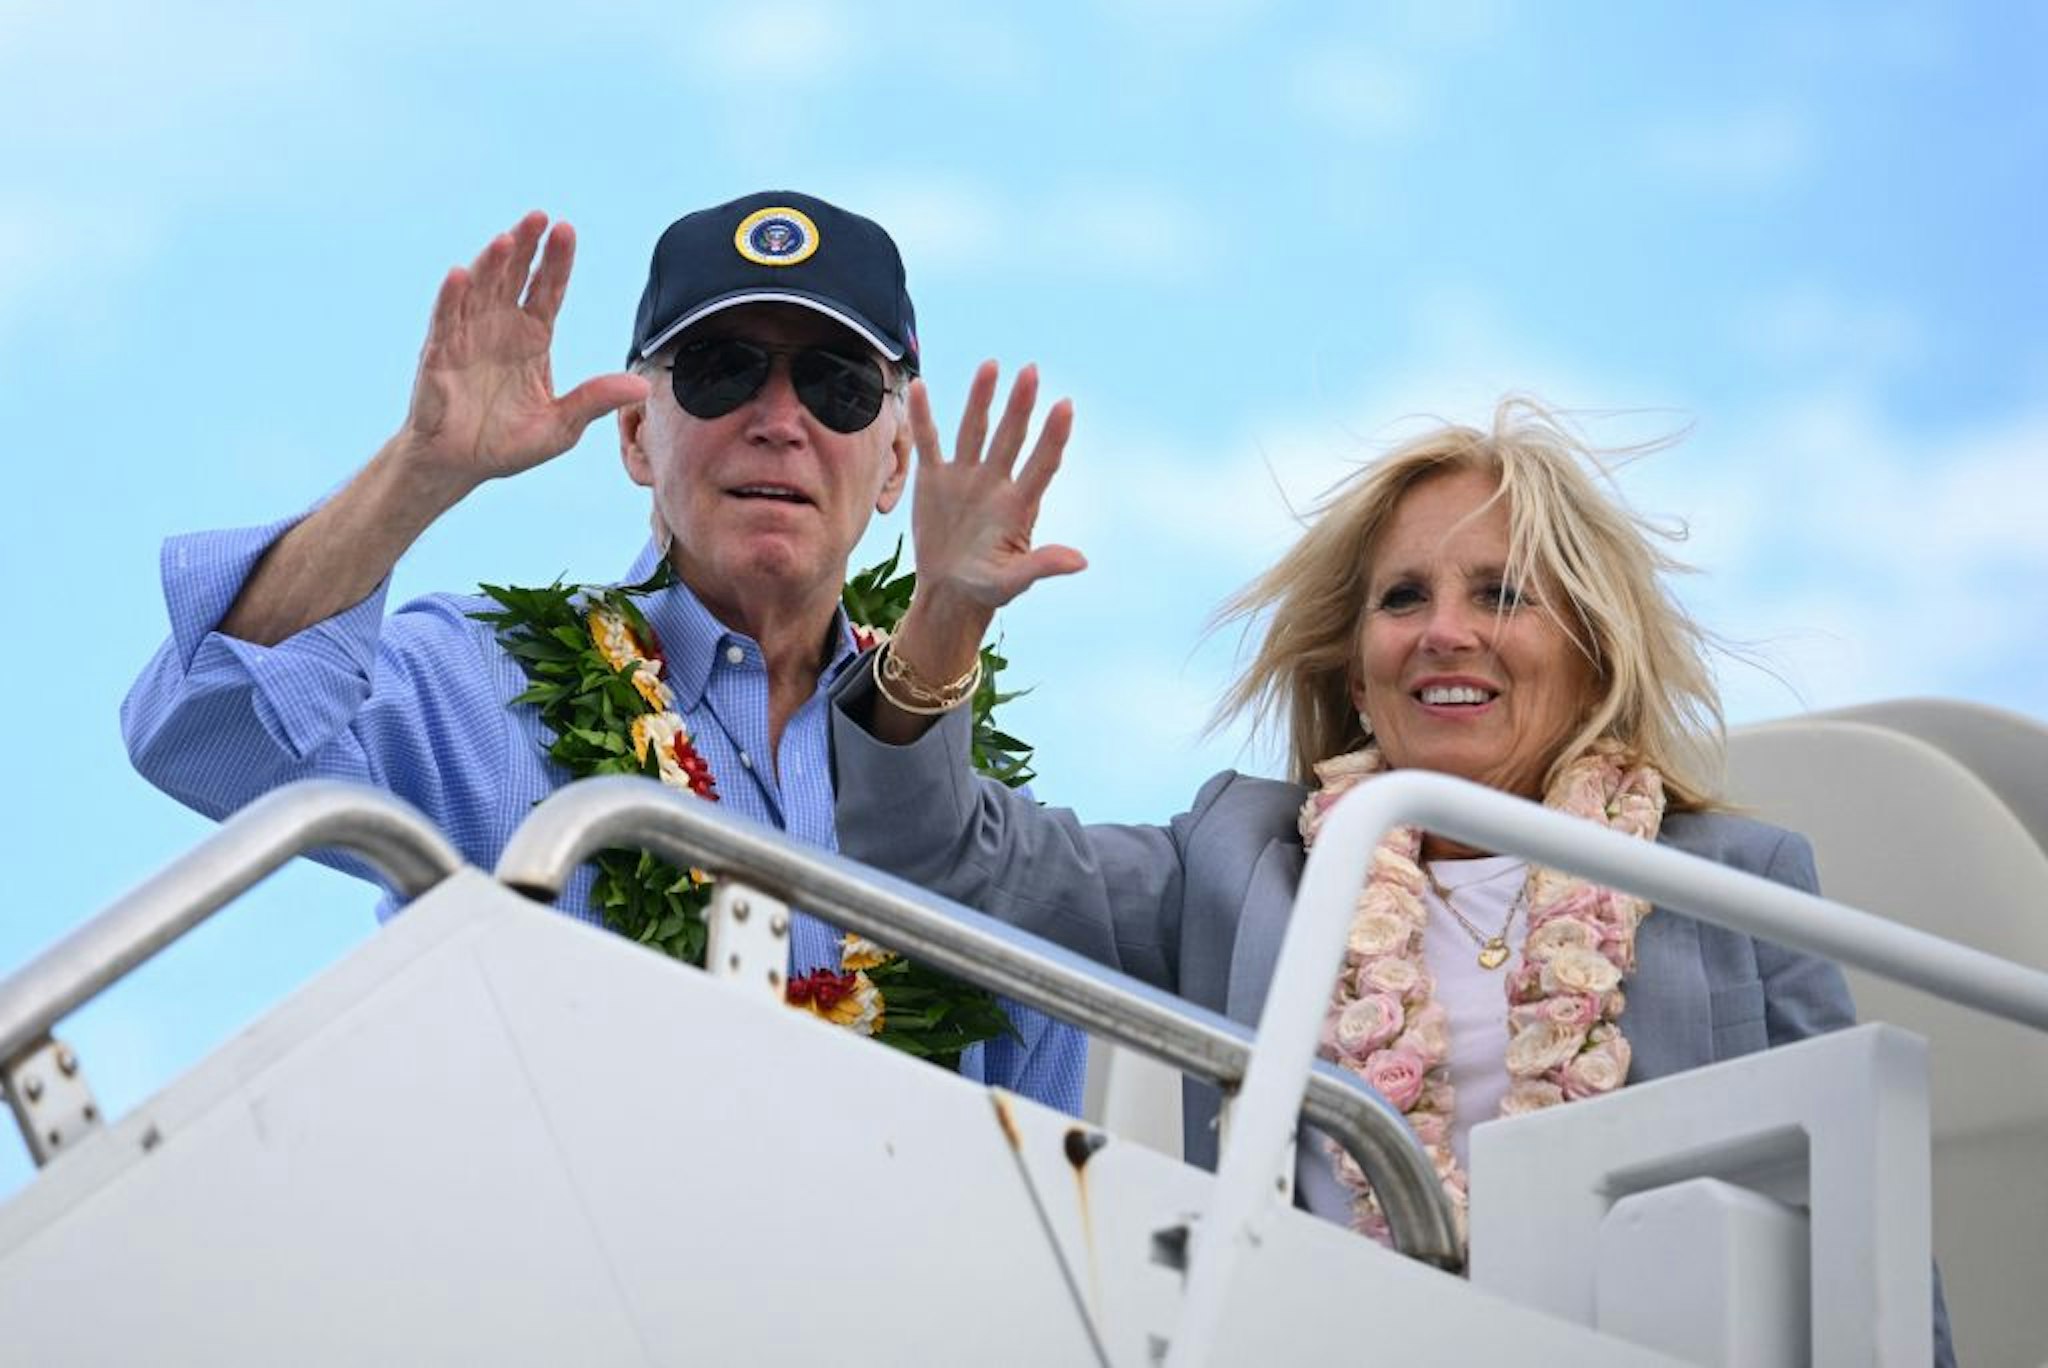 US President Joe Biden and US First Lady Jill Biden wear Hawaiian leis as they wave from Air Force One before departing Kahului Airport in Kahului, Hawaii, on August 21, 2023. The Bidens spent the day meeting with first responders, survivors, and local officials following deadly wildfires in Maui. (Photo by Mandel NGAN / AFP)